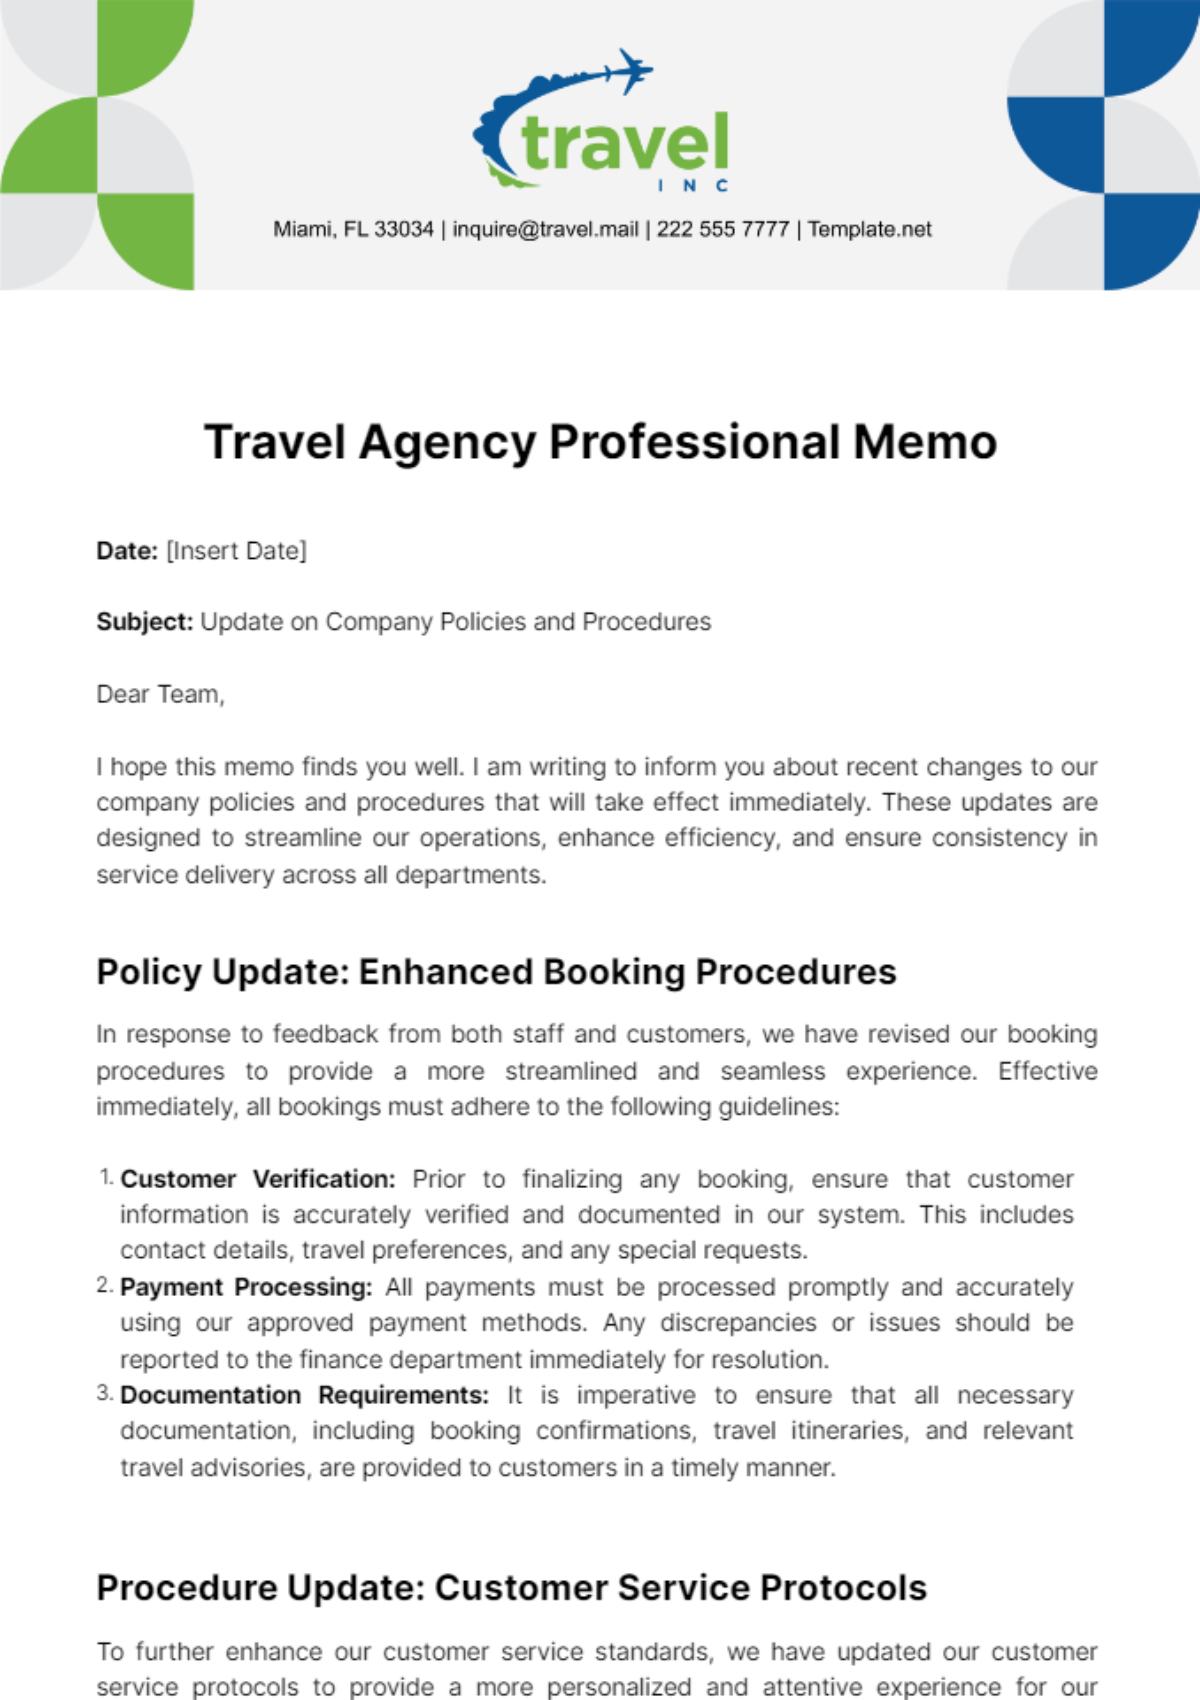 Free Travel Agency Professional Memo Template